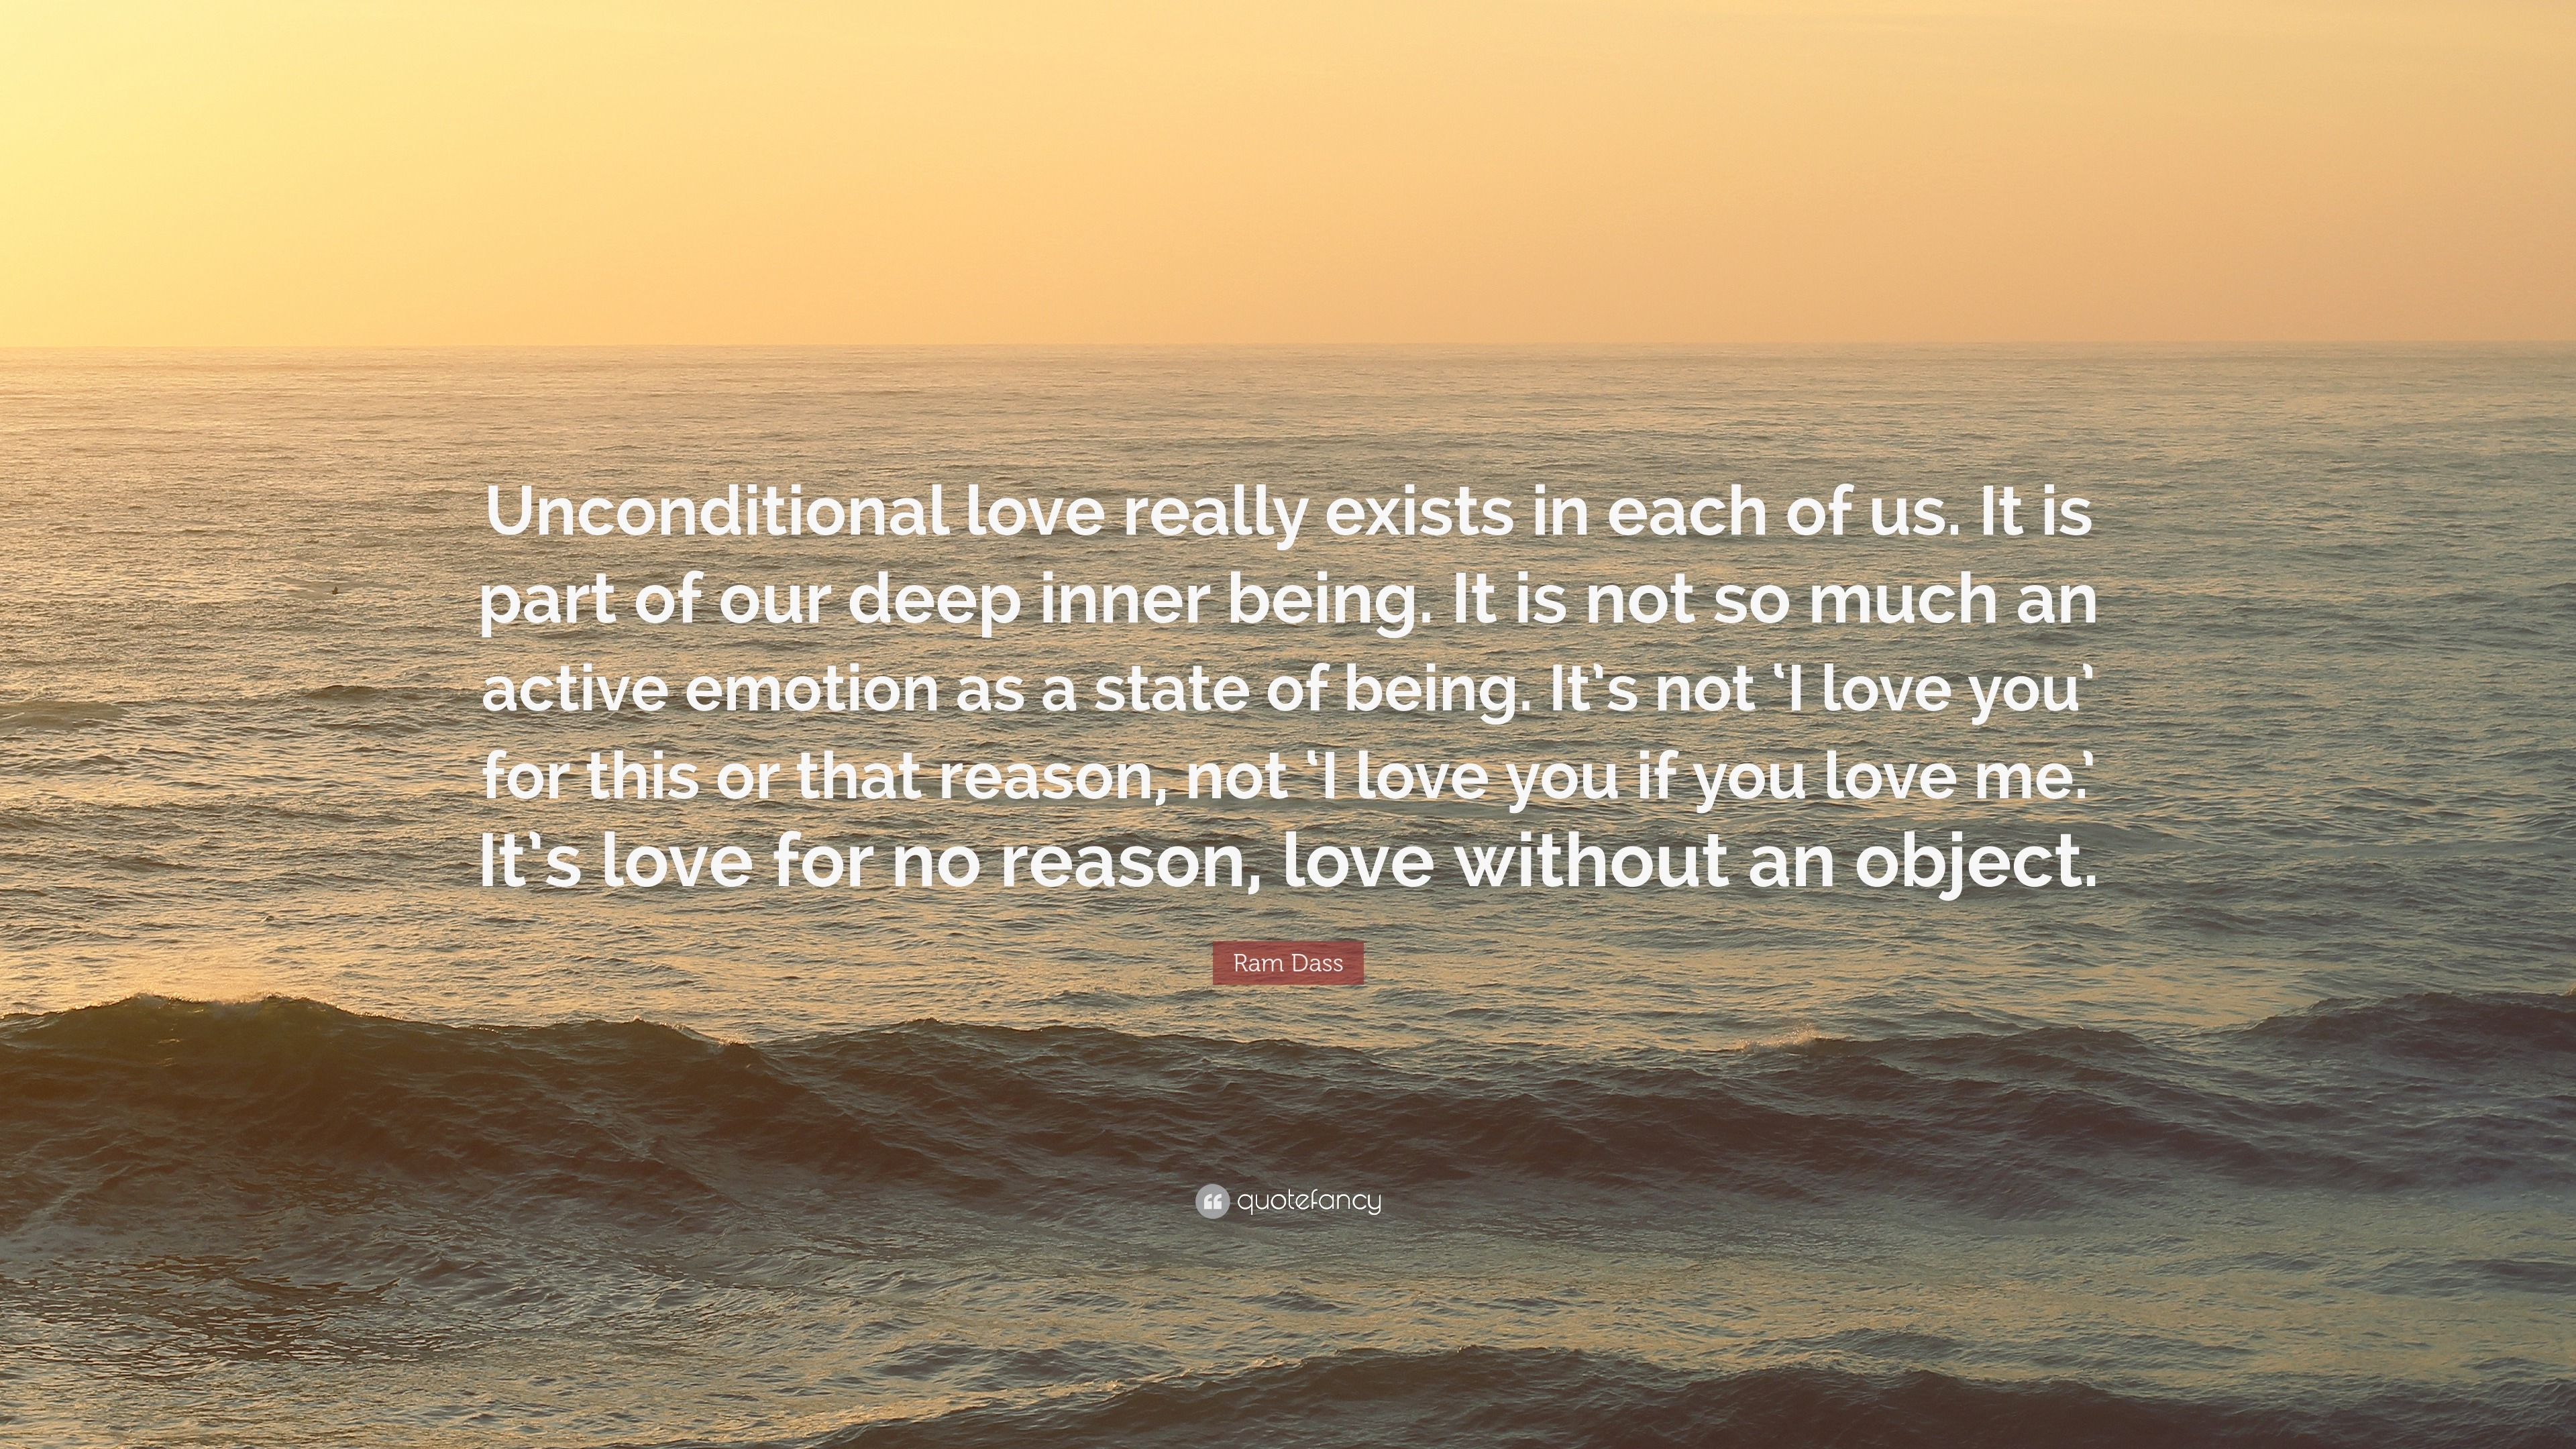 Quotes on unconditional love - dikigoto